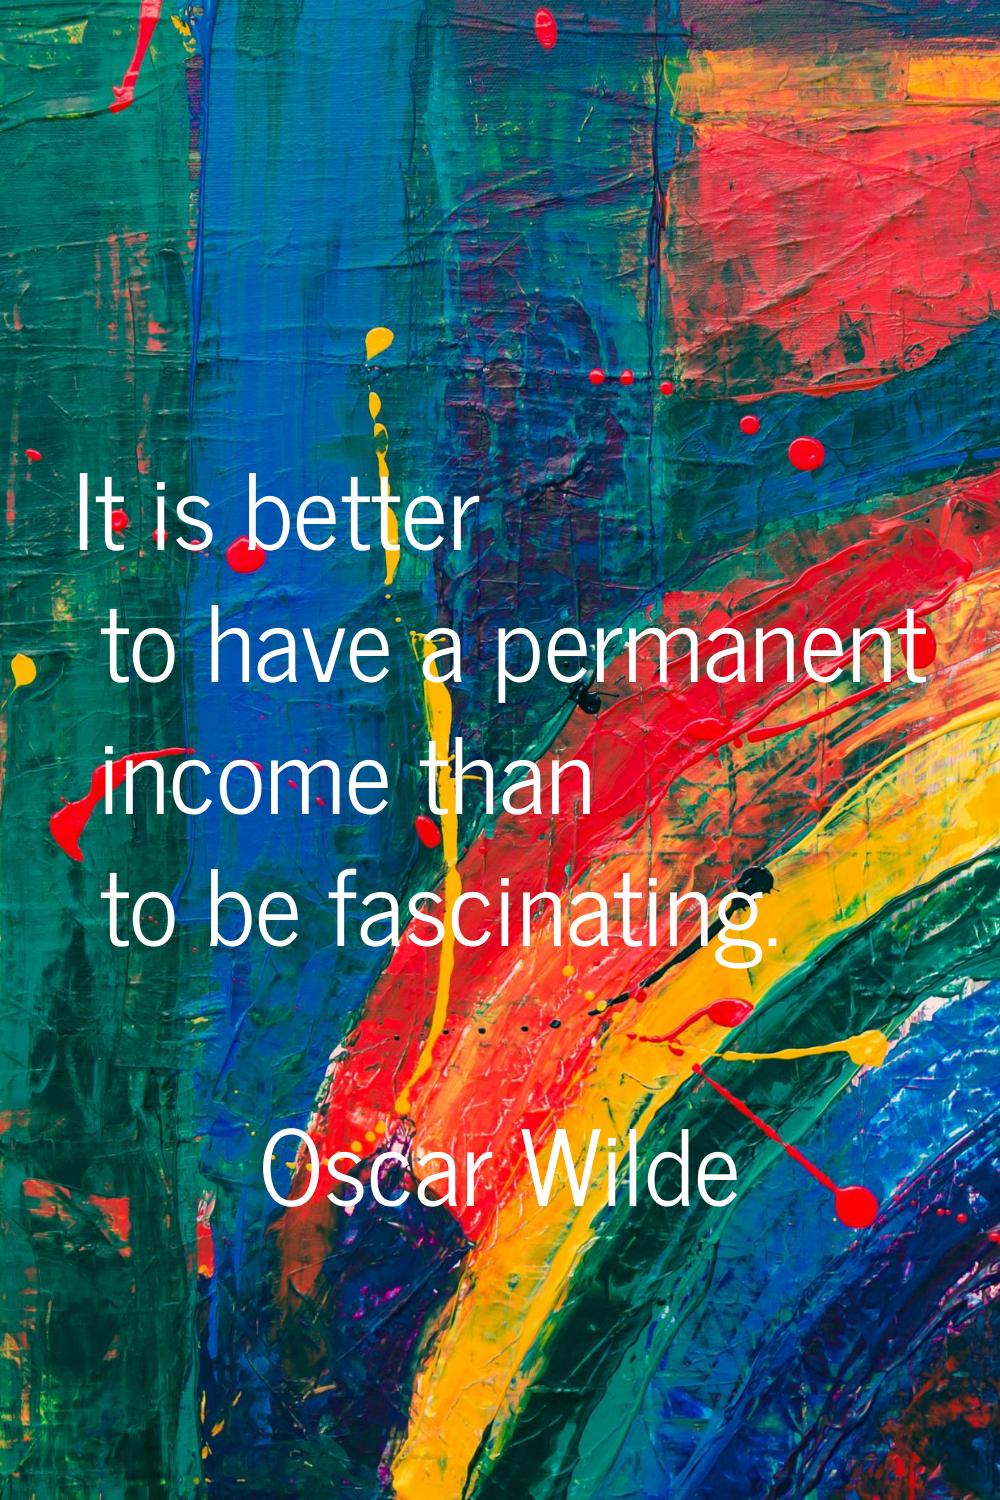 It is better to have a permanent income than to be fascinating.